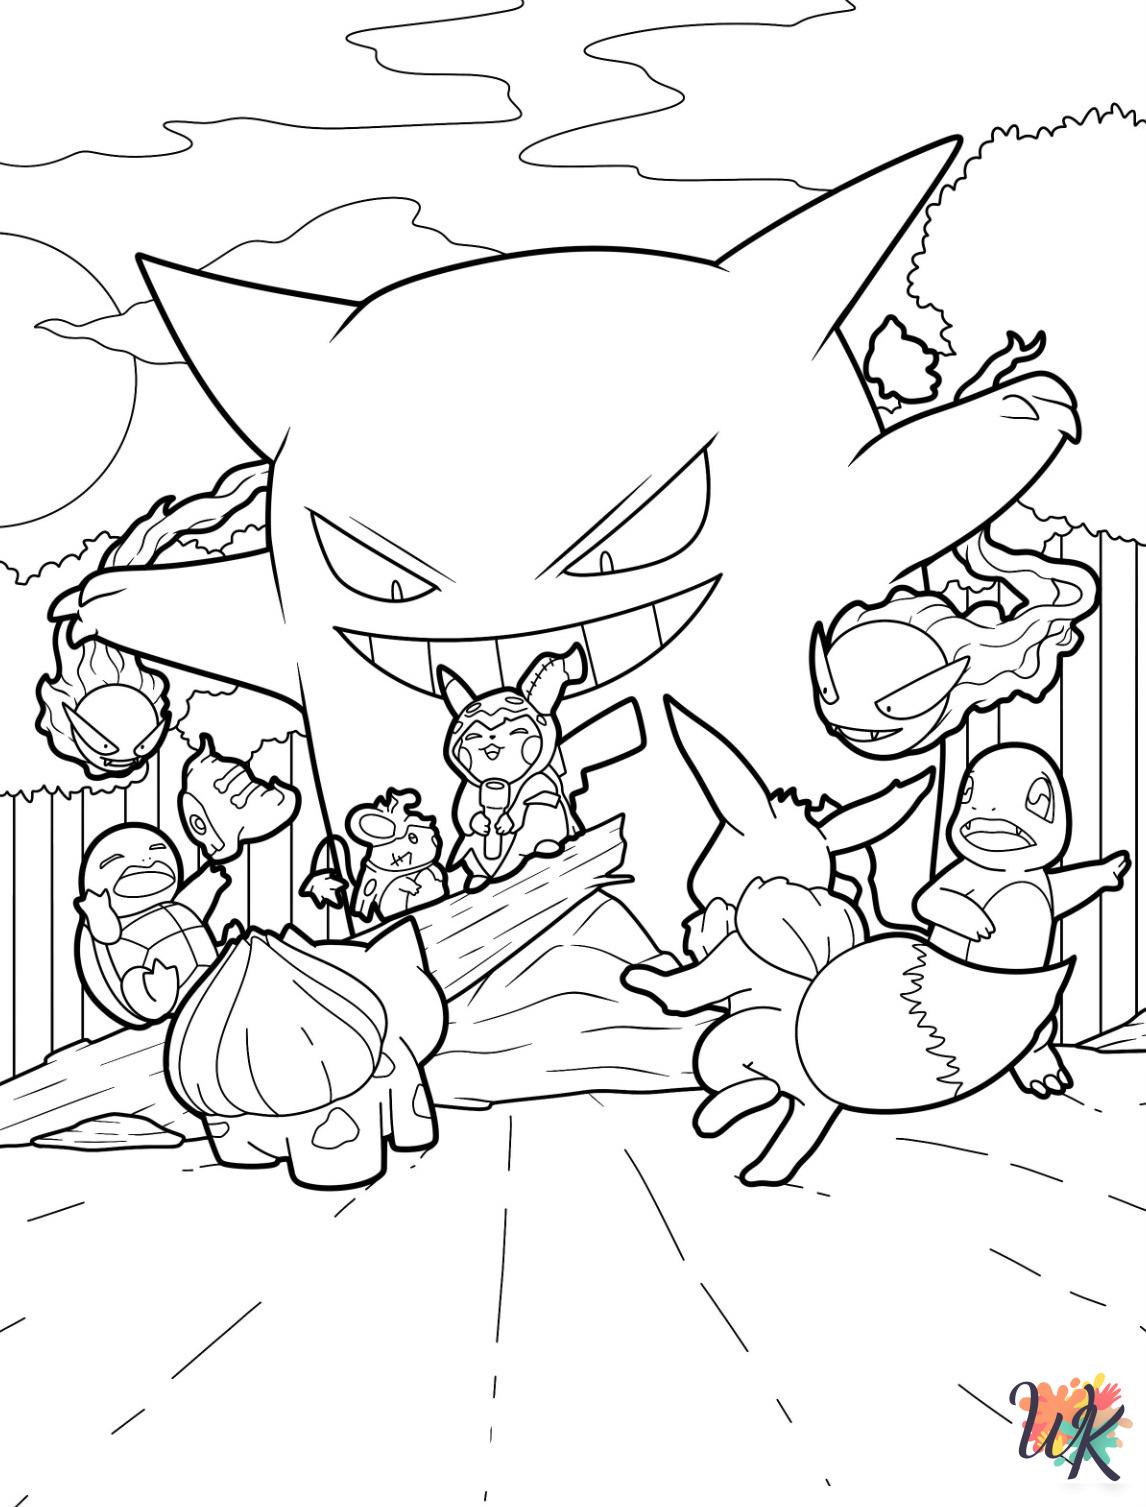 Gengar coloring pages to print 1